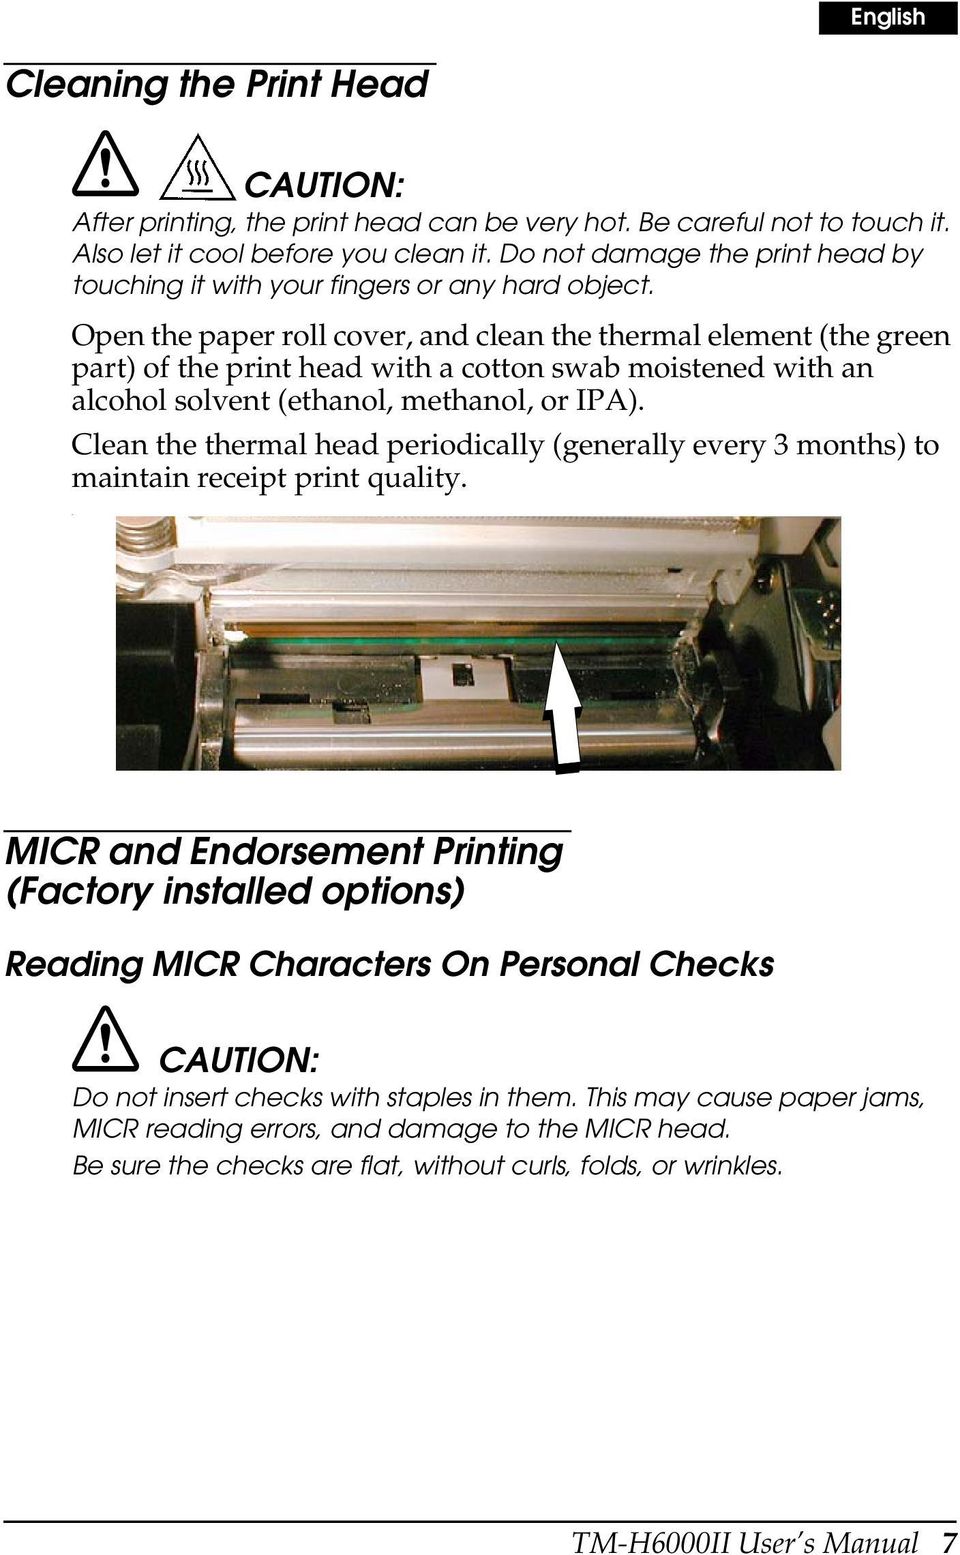 Open the paper roll cover, and clean the thermal element (the green part) of the print head with a cotton swab moistened with an alcohol solvent (ethanol, methanol, or IPA).